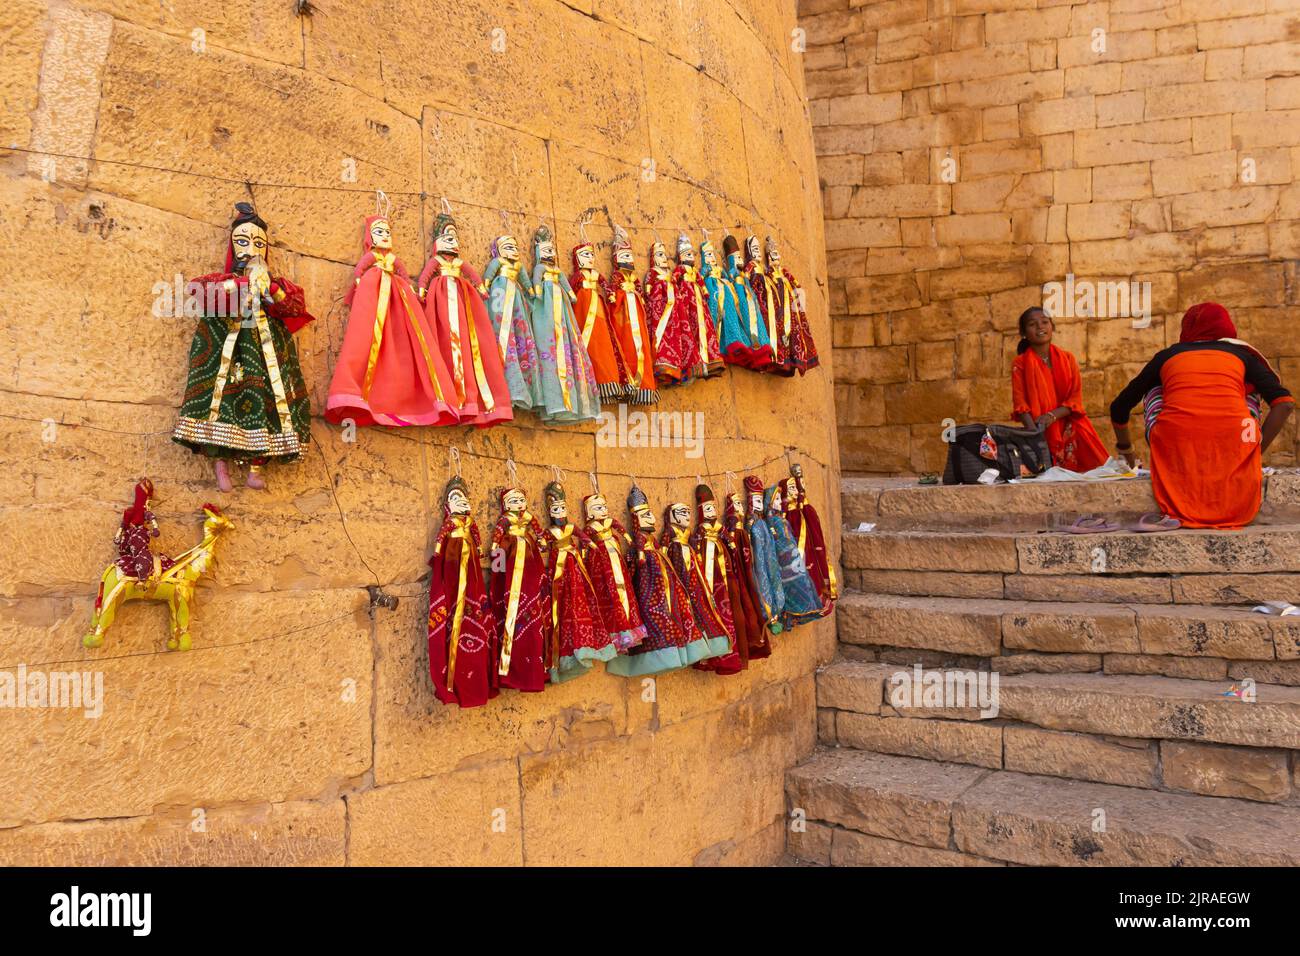 The Views of Jaisalmer City, Landscapes and street Activities Stock Photo